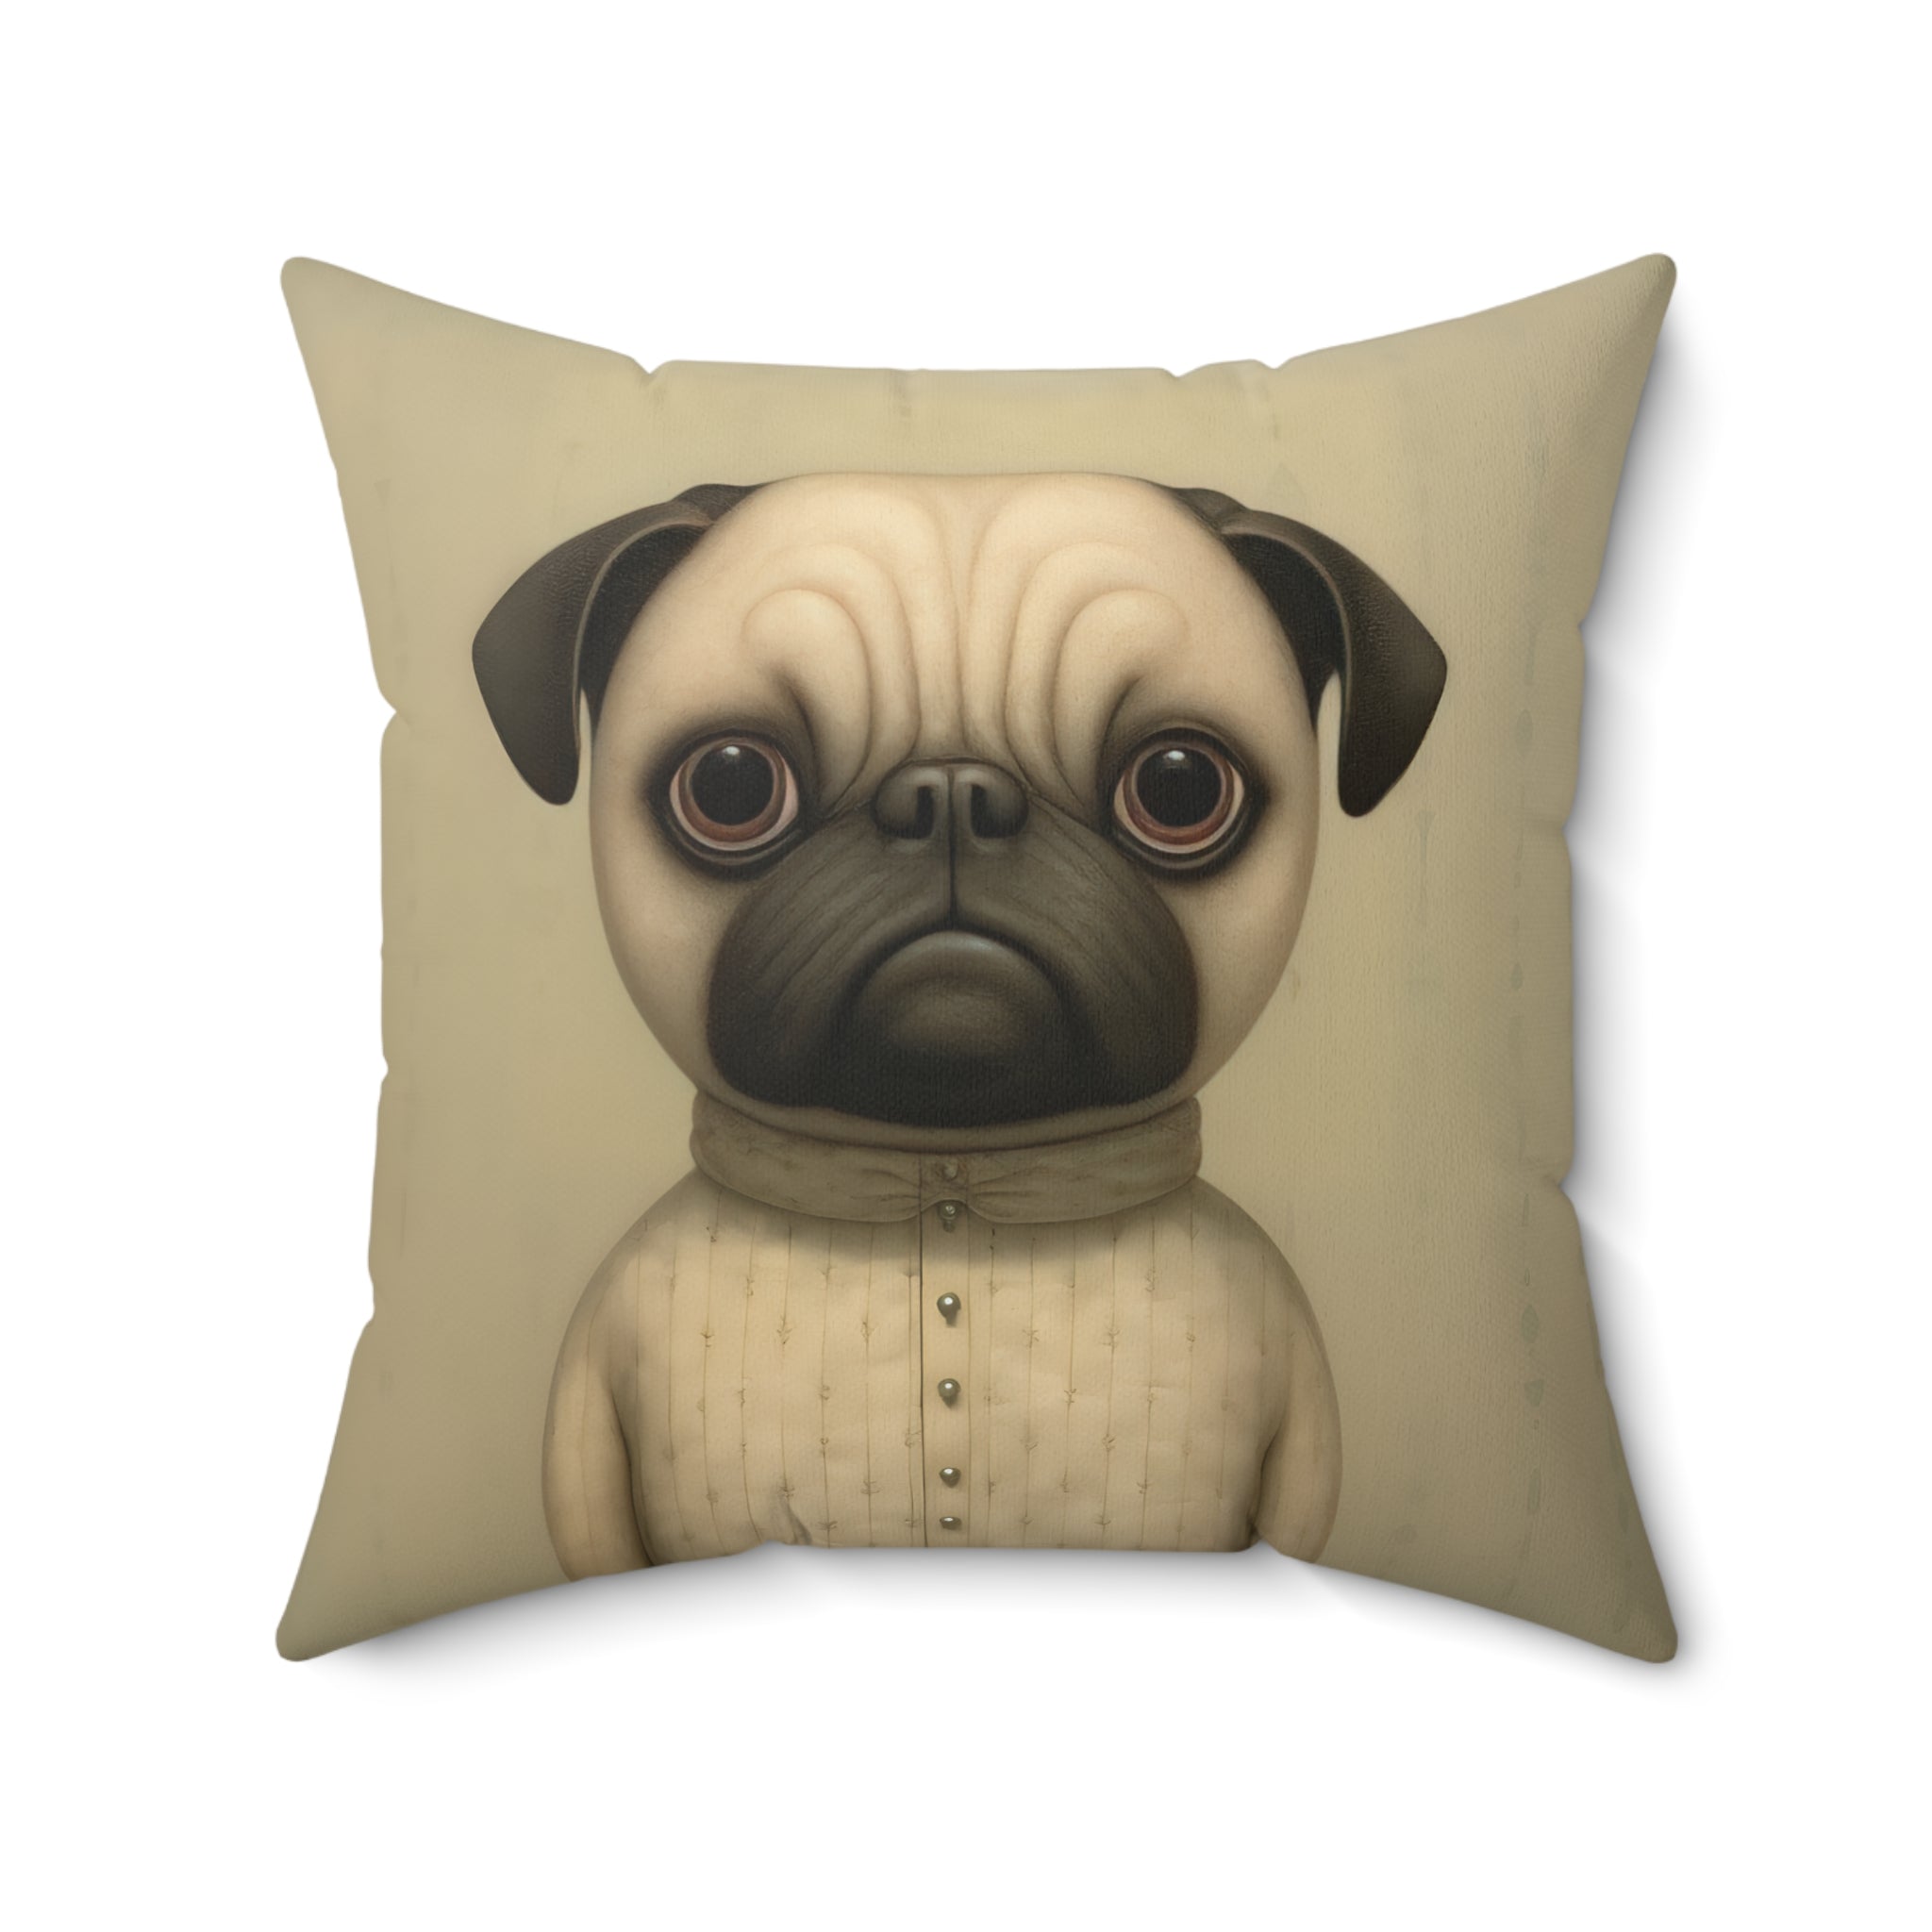 Mrs. Prudence Square Pillow